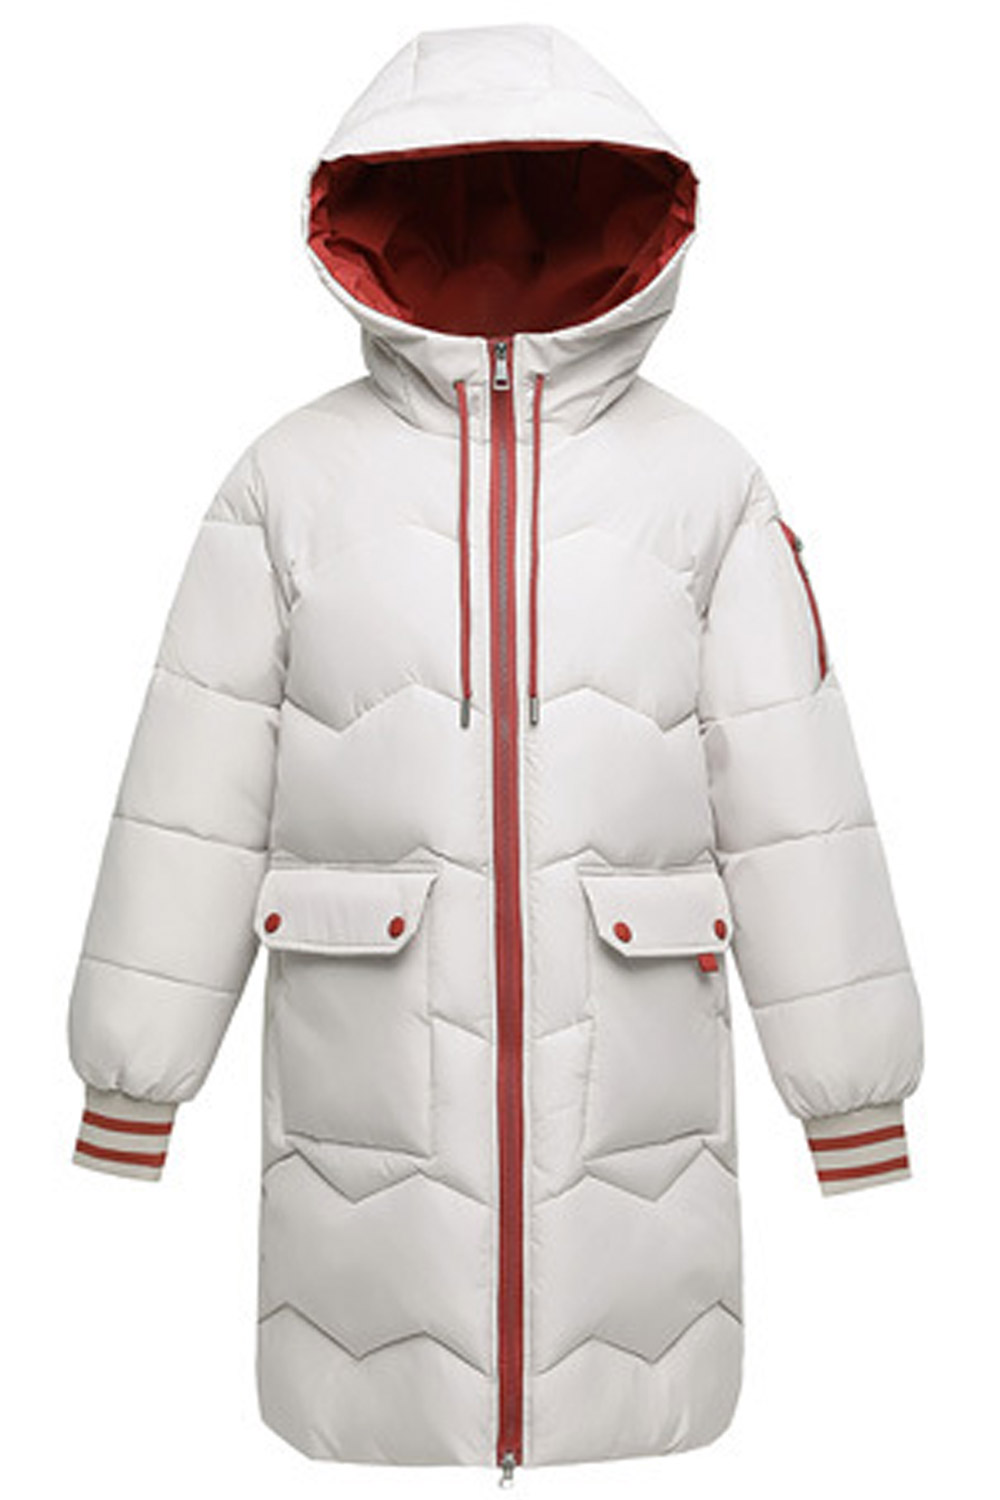 Tom Carry Women Lovely Drawstring Hooded Ribbed Cuff Flap Pockets Comfy Winter Padded Jacket